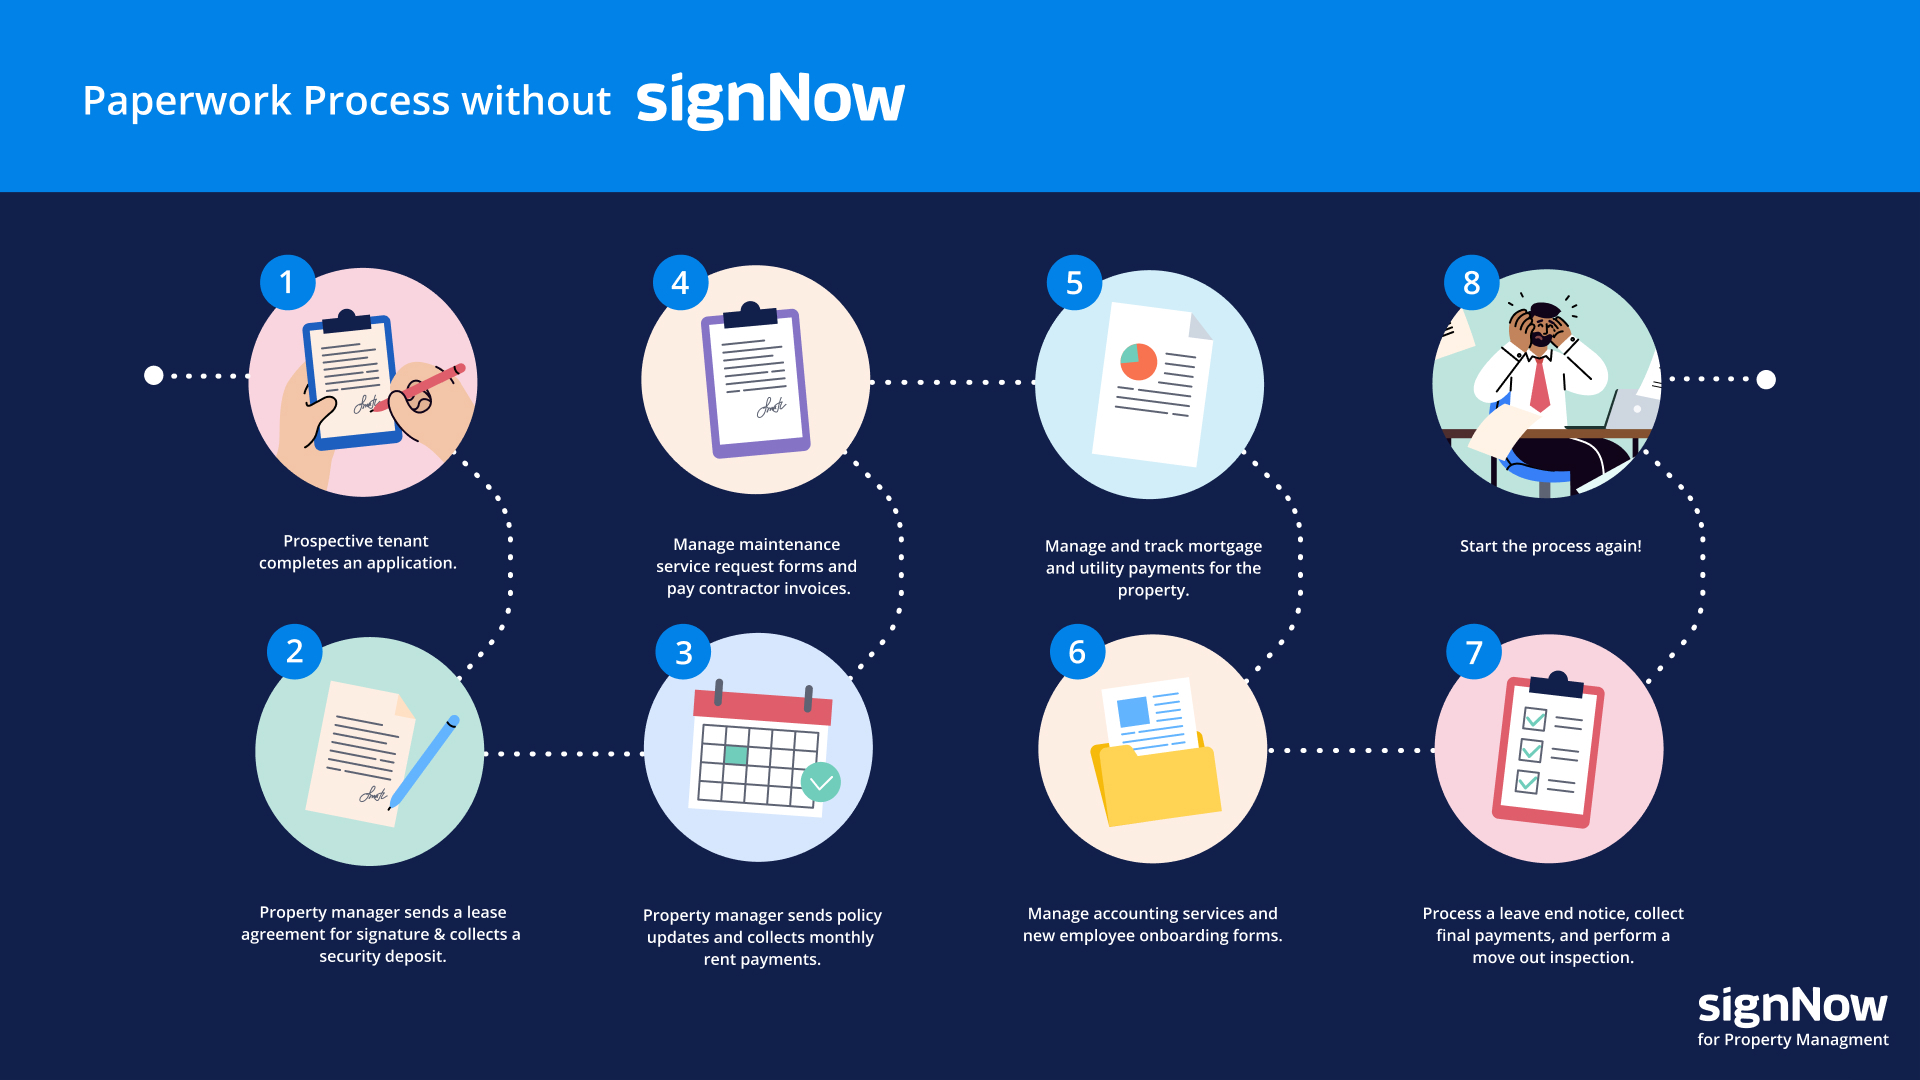 Paperwork process without signNow